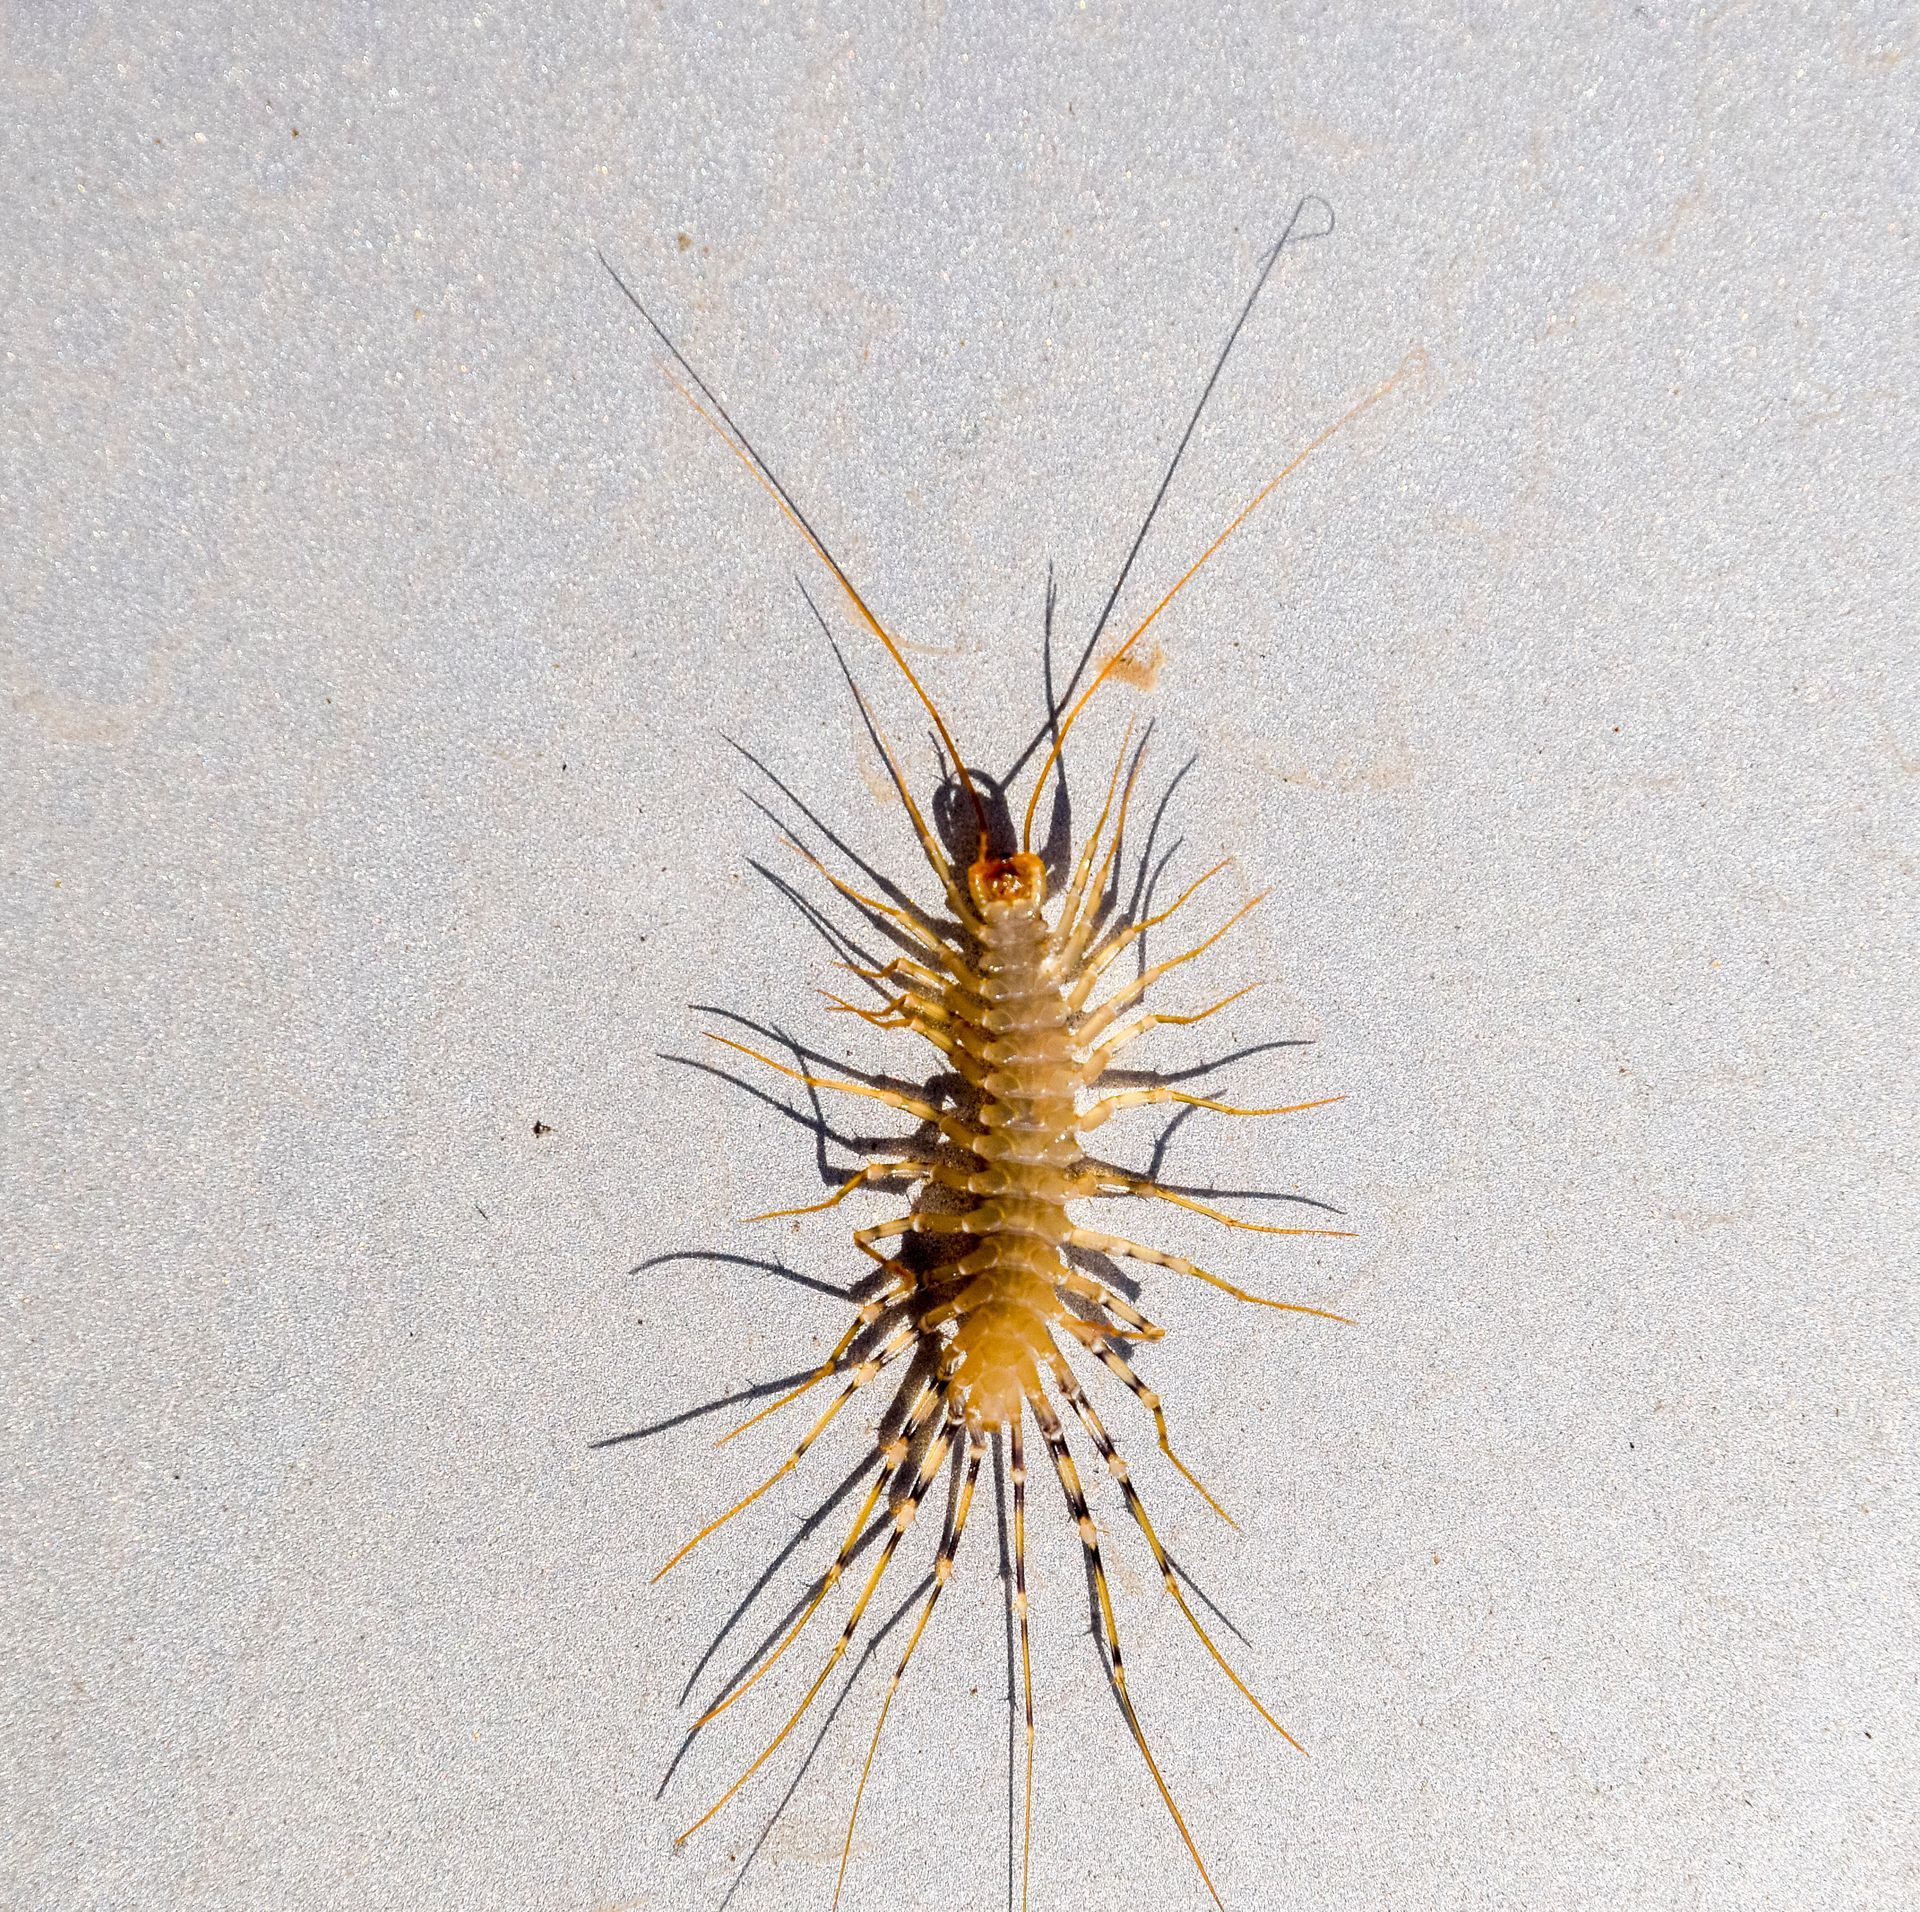 Centipede on a wall